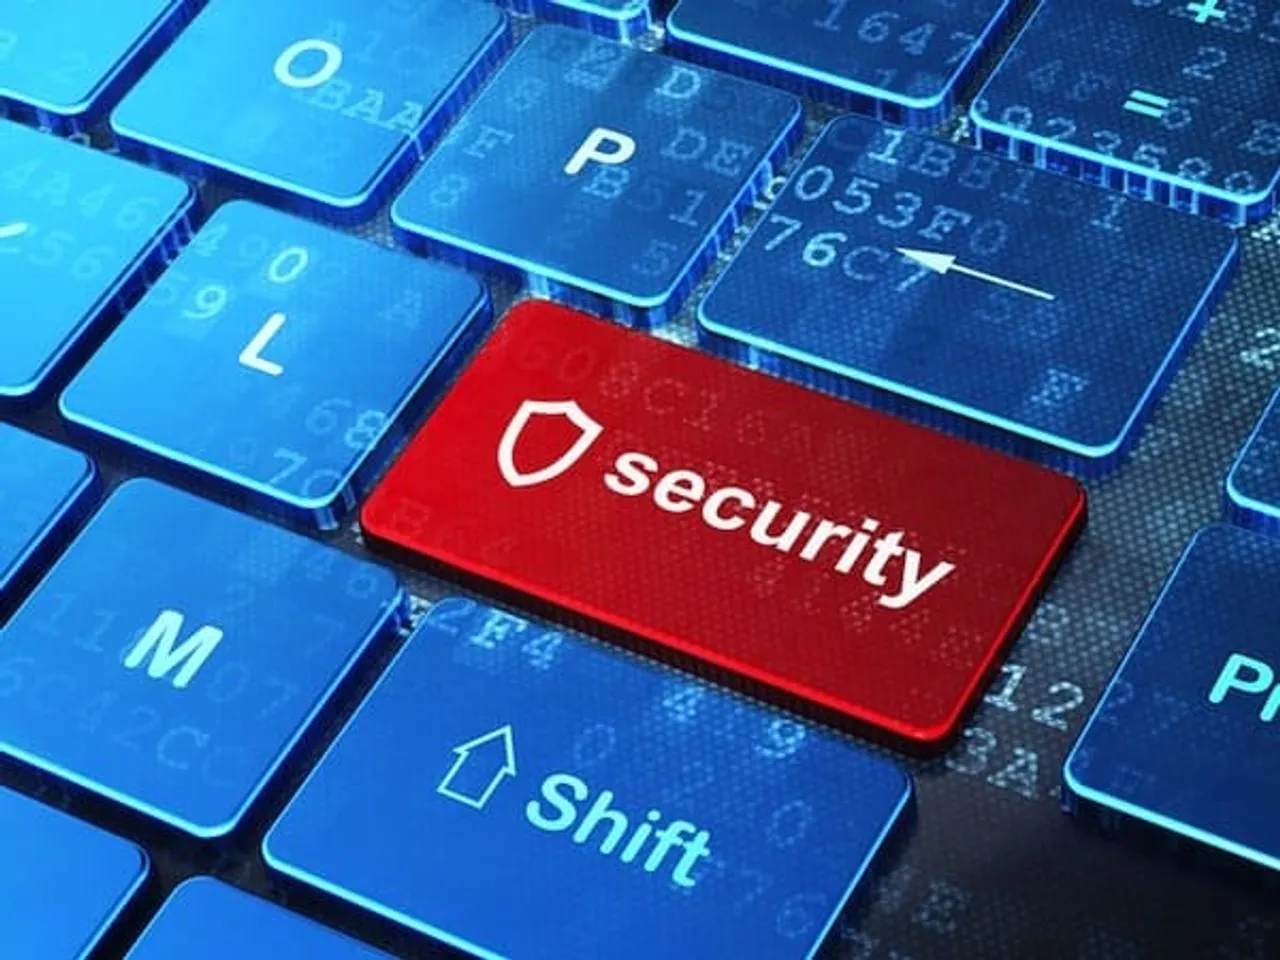 Government to fund R&D cost of up to Rs 5cr for cyber security